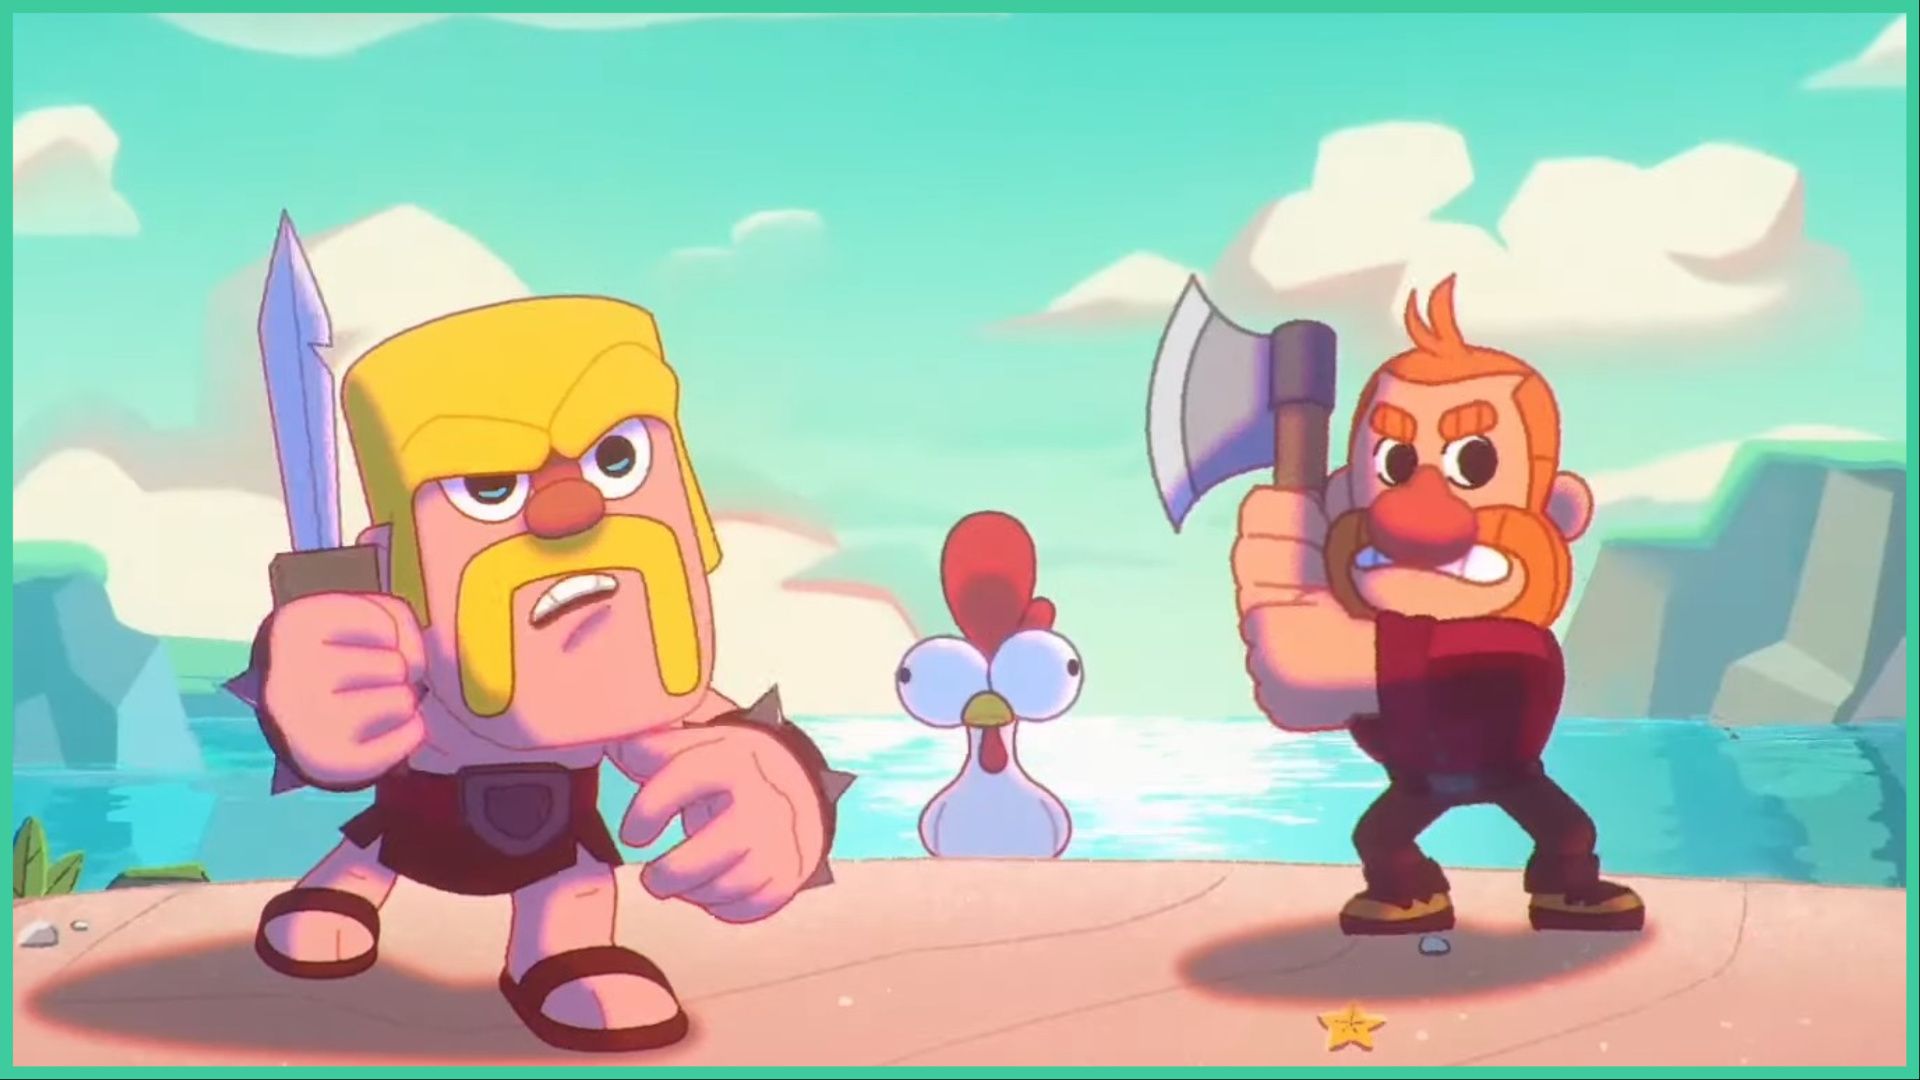 feature image for our squad busters tier list, the image is a screenshot from the game's launch trailer, with the units greg and the barbarian standing on beach sand with the ocean behind them, as the barbarian holds a sword and has a confused expression on his face, while greg holds an axe up while gritting his teeth, there is a chicken with huge eyes behind them, with a rock on the sand, a starfish, and some seaweed, there are cliffs in the distance within the water